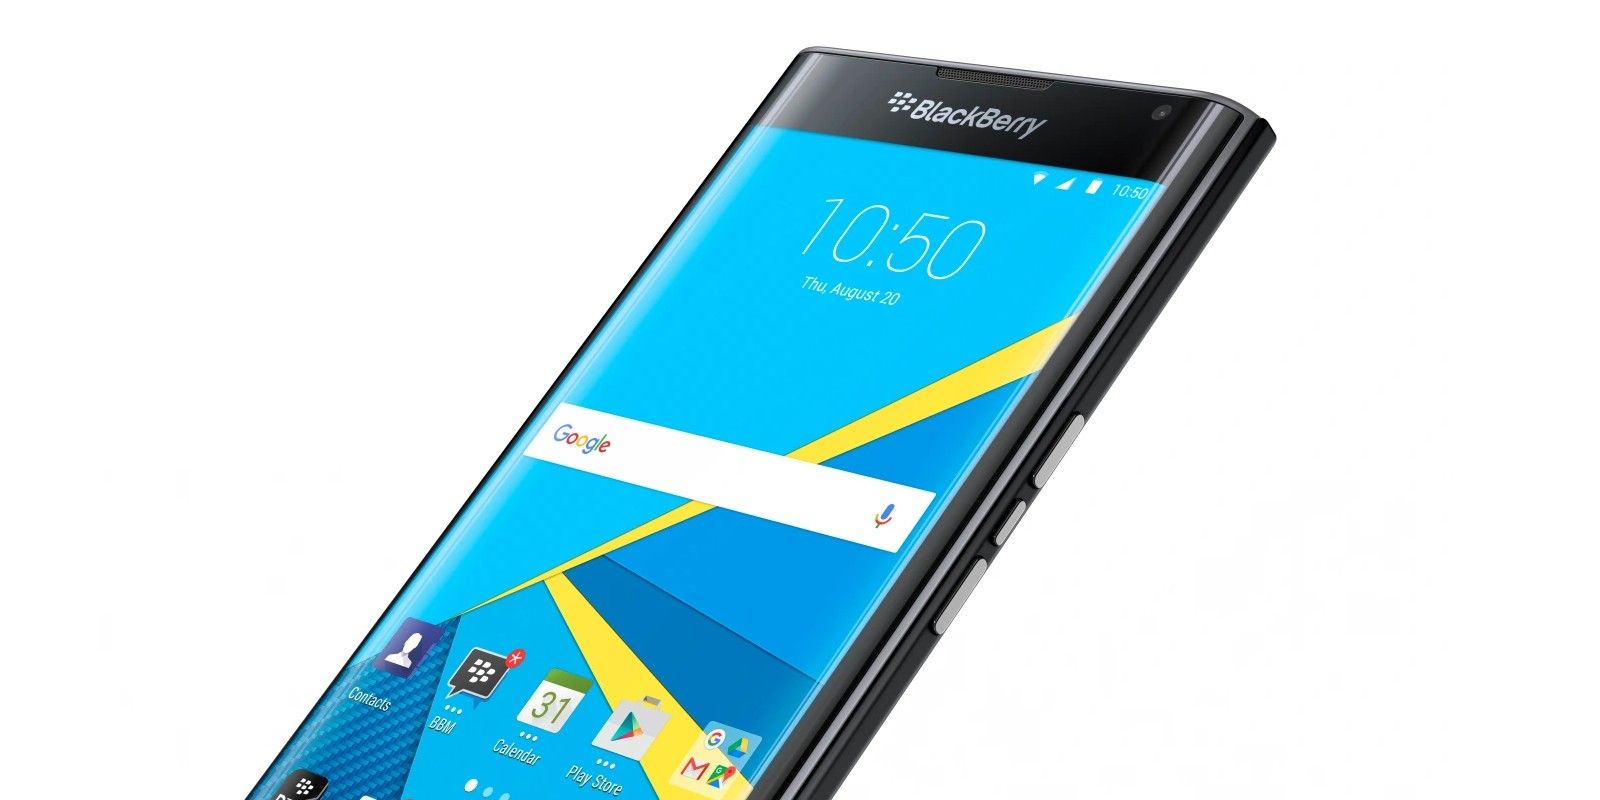 The BlackBerry Priv was an Android-powered smartphone